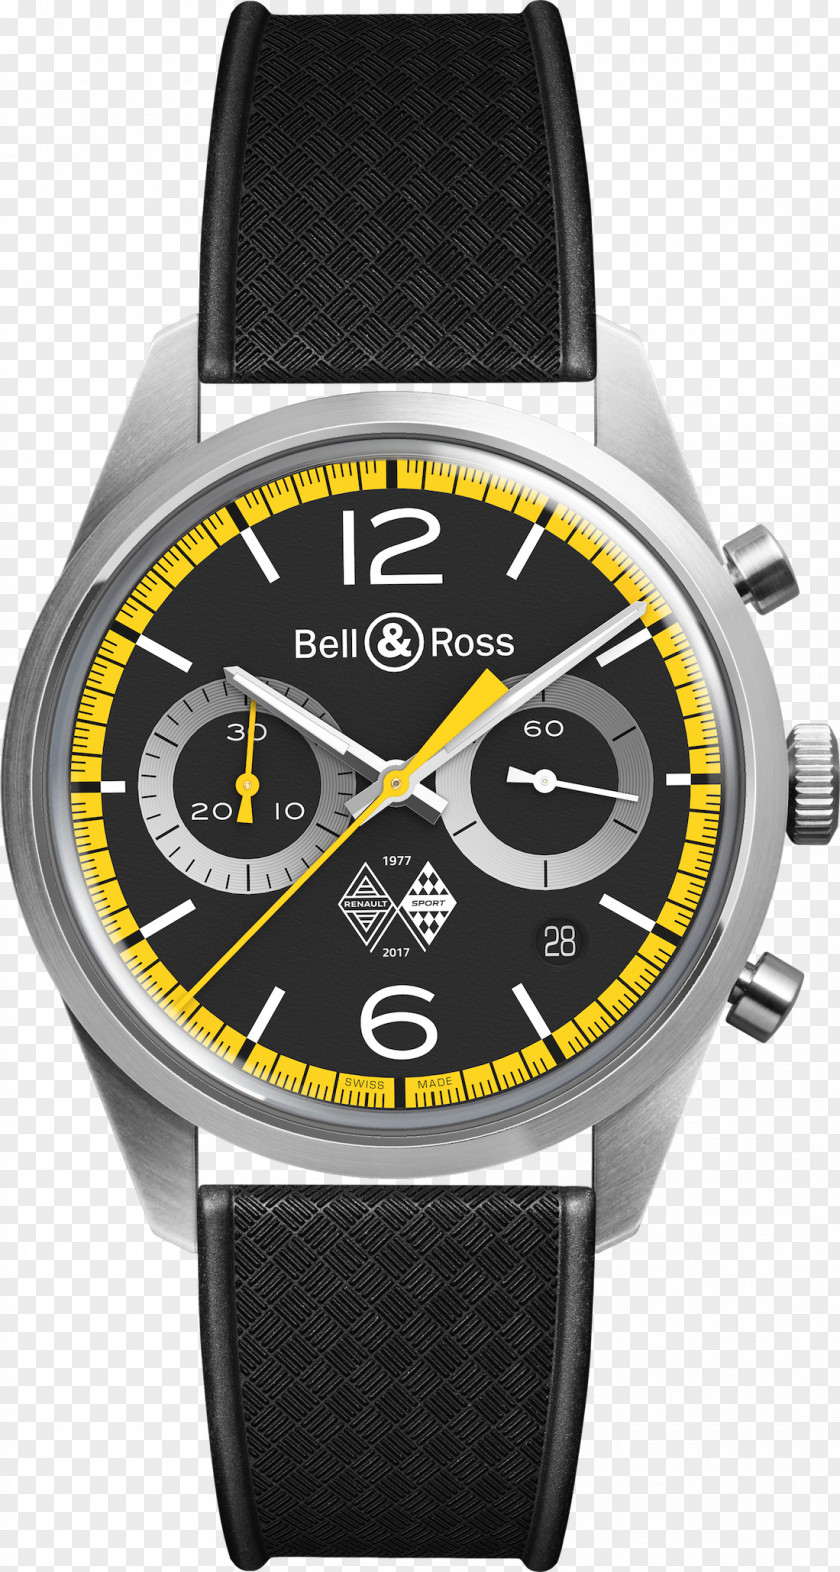 Watch Bell & Ross, Inc. Chronograph Strap PNG